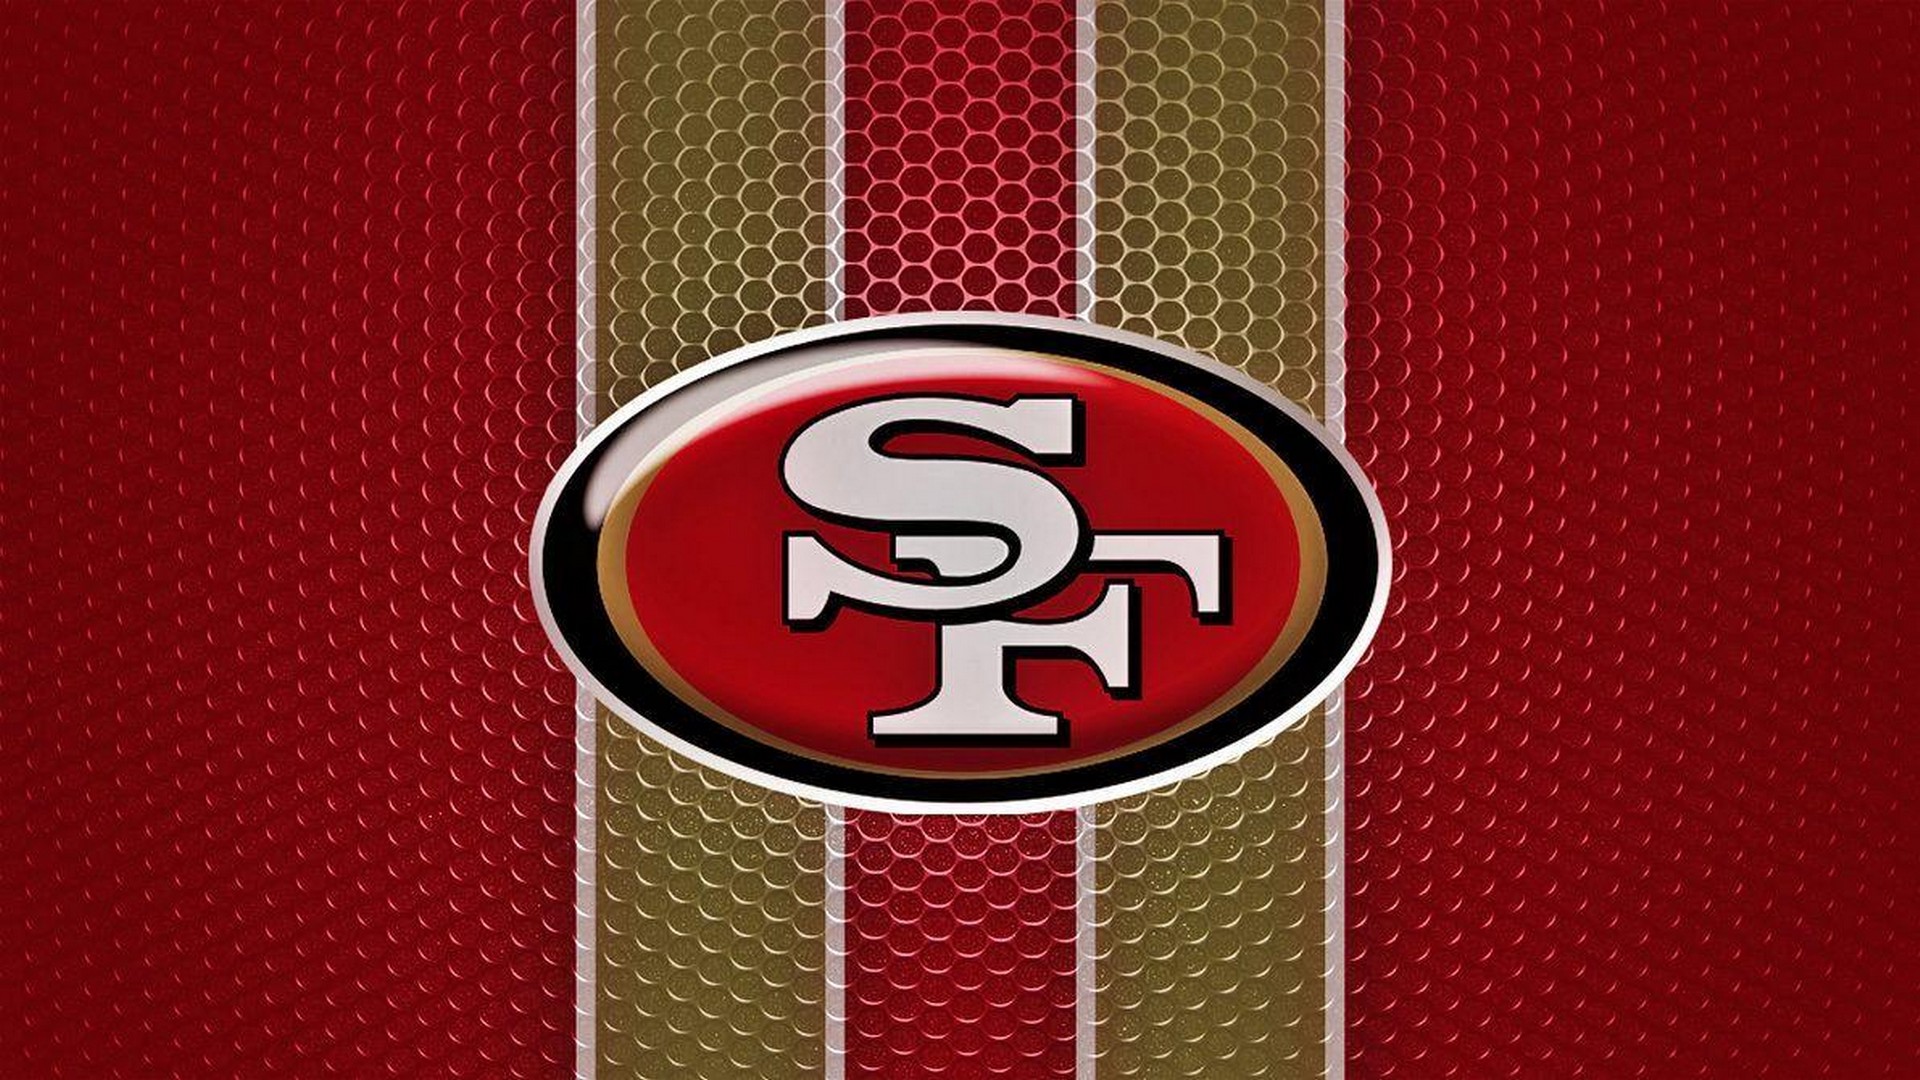 San Francisco 49ers Hd Wallpapers 2021 Nfl Football Wallpapers